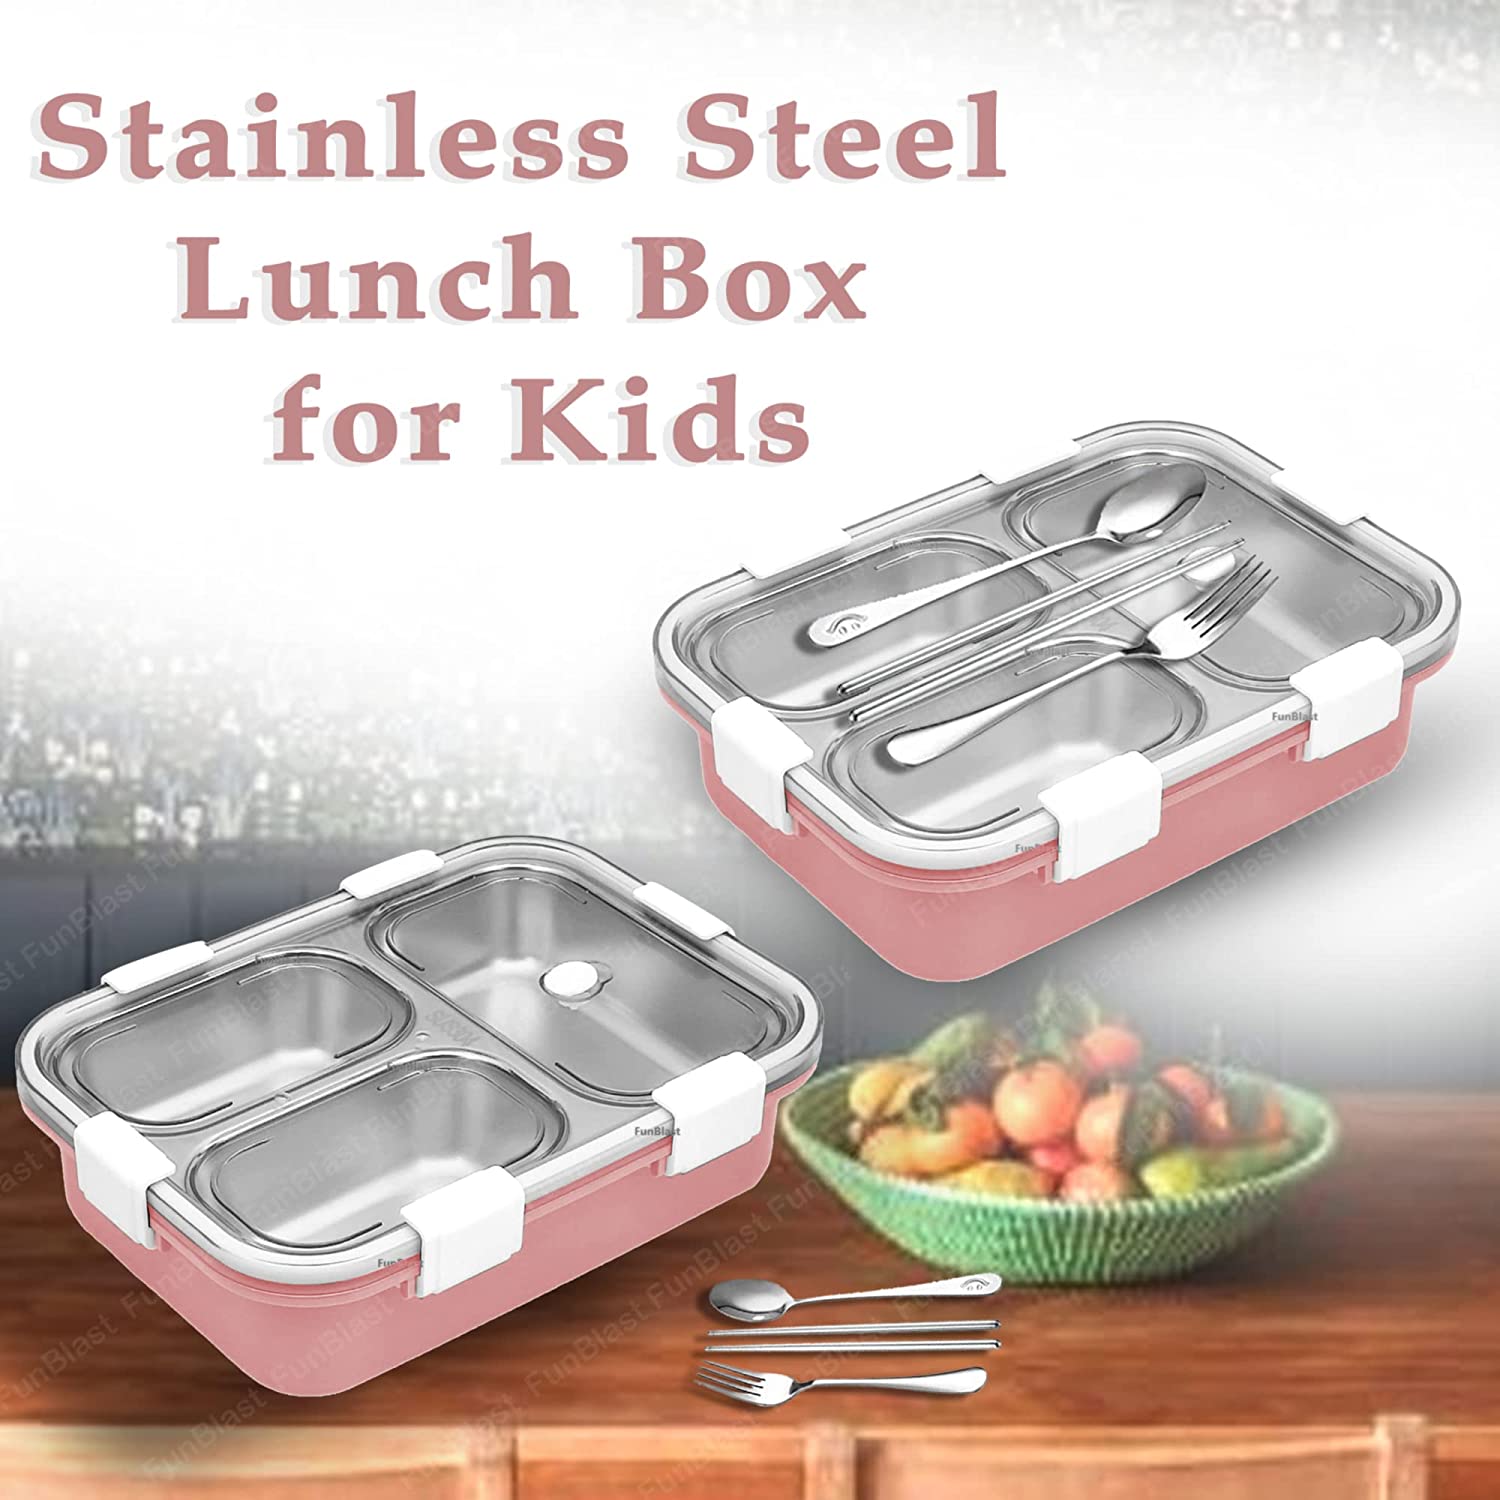 Stainless Steel Lunch Box for Kids, Tiffin Box, Bento Lunch Box with Chopstick Spoon & Fork, Insulated Lunch Box (Not Leak-Proof - for Dry Foods Only)